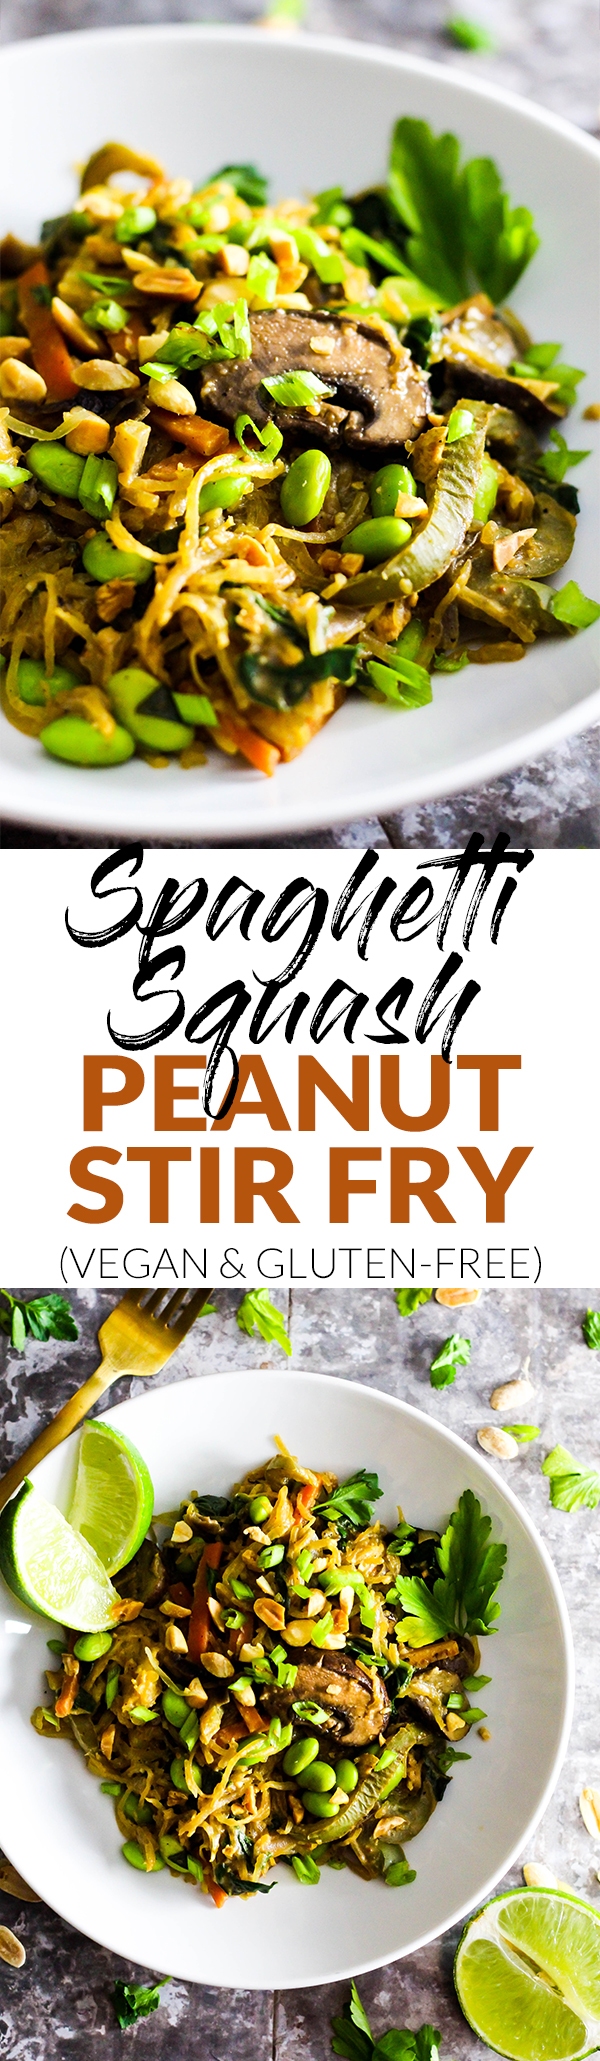 This Spaghetti Squash Peanut Stir Fry is an easy, hearty, vegetable-packed dinner that's done in just 1 hour. Vegan & gluten-free!